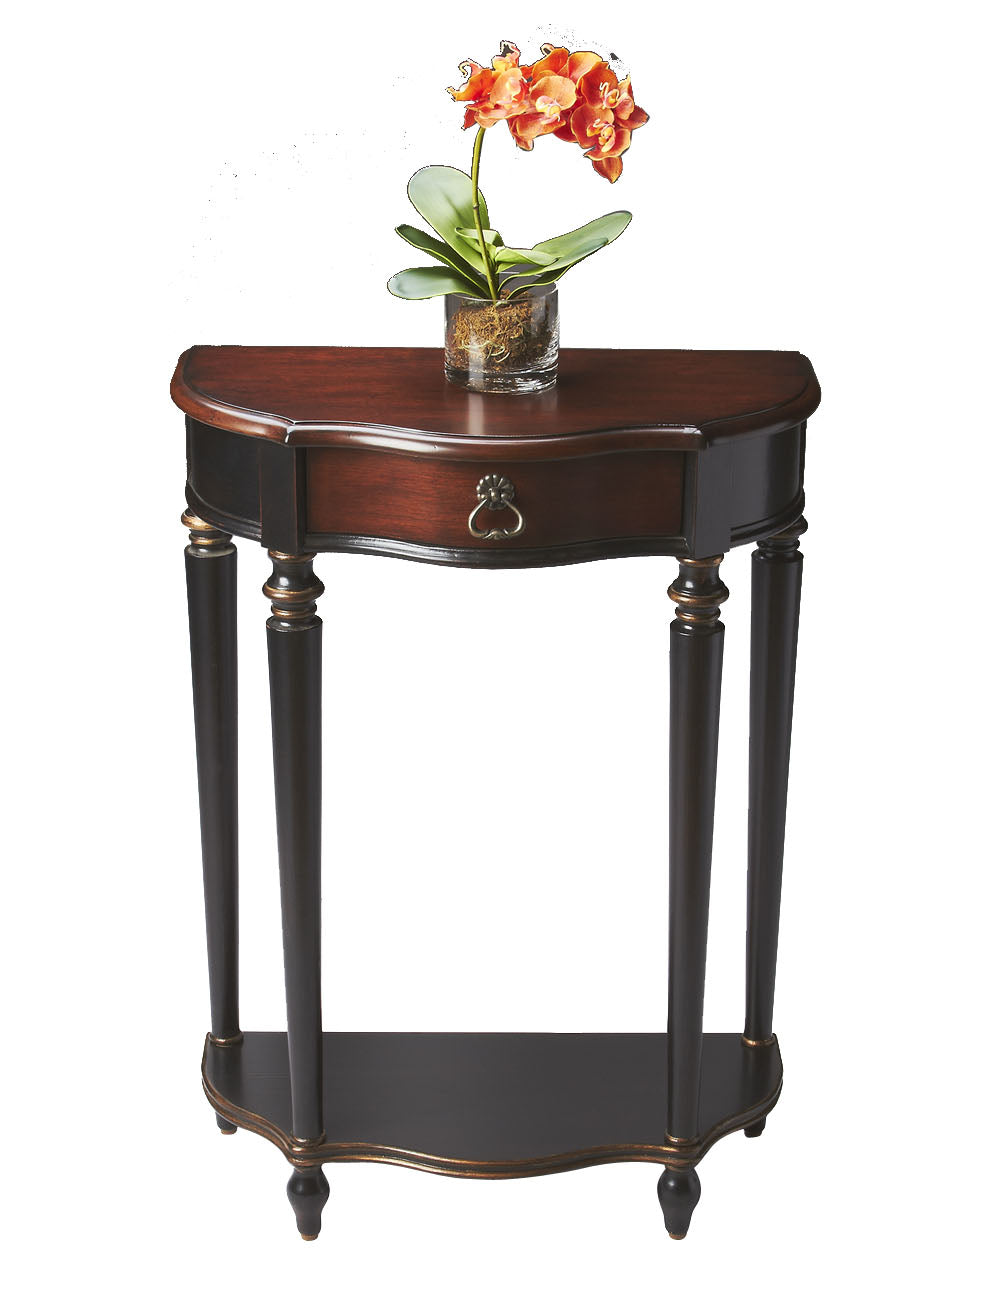 Console Table Cafe Noir Light - YuppyCollections